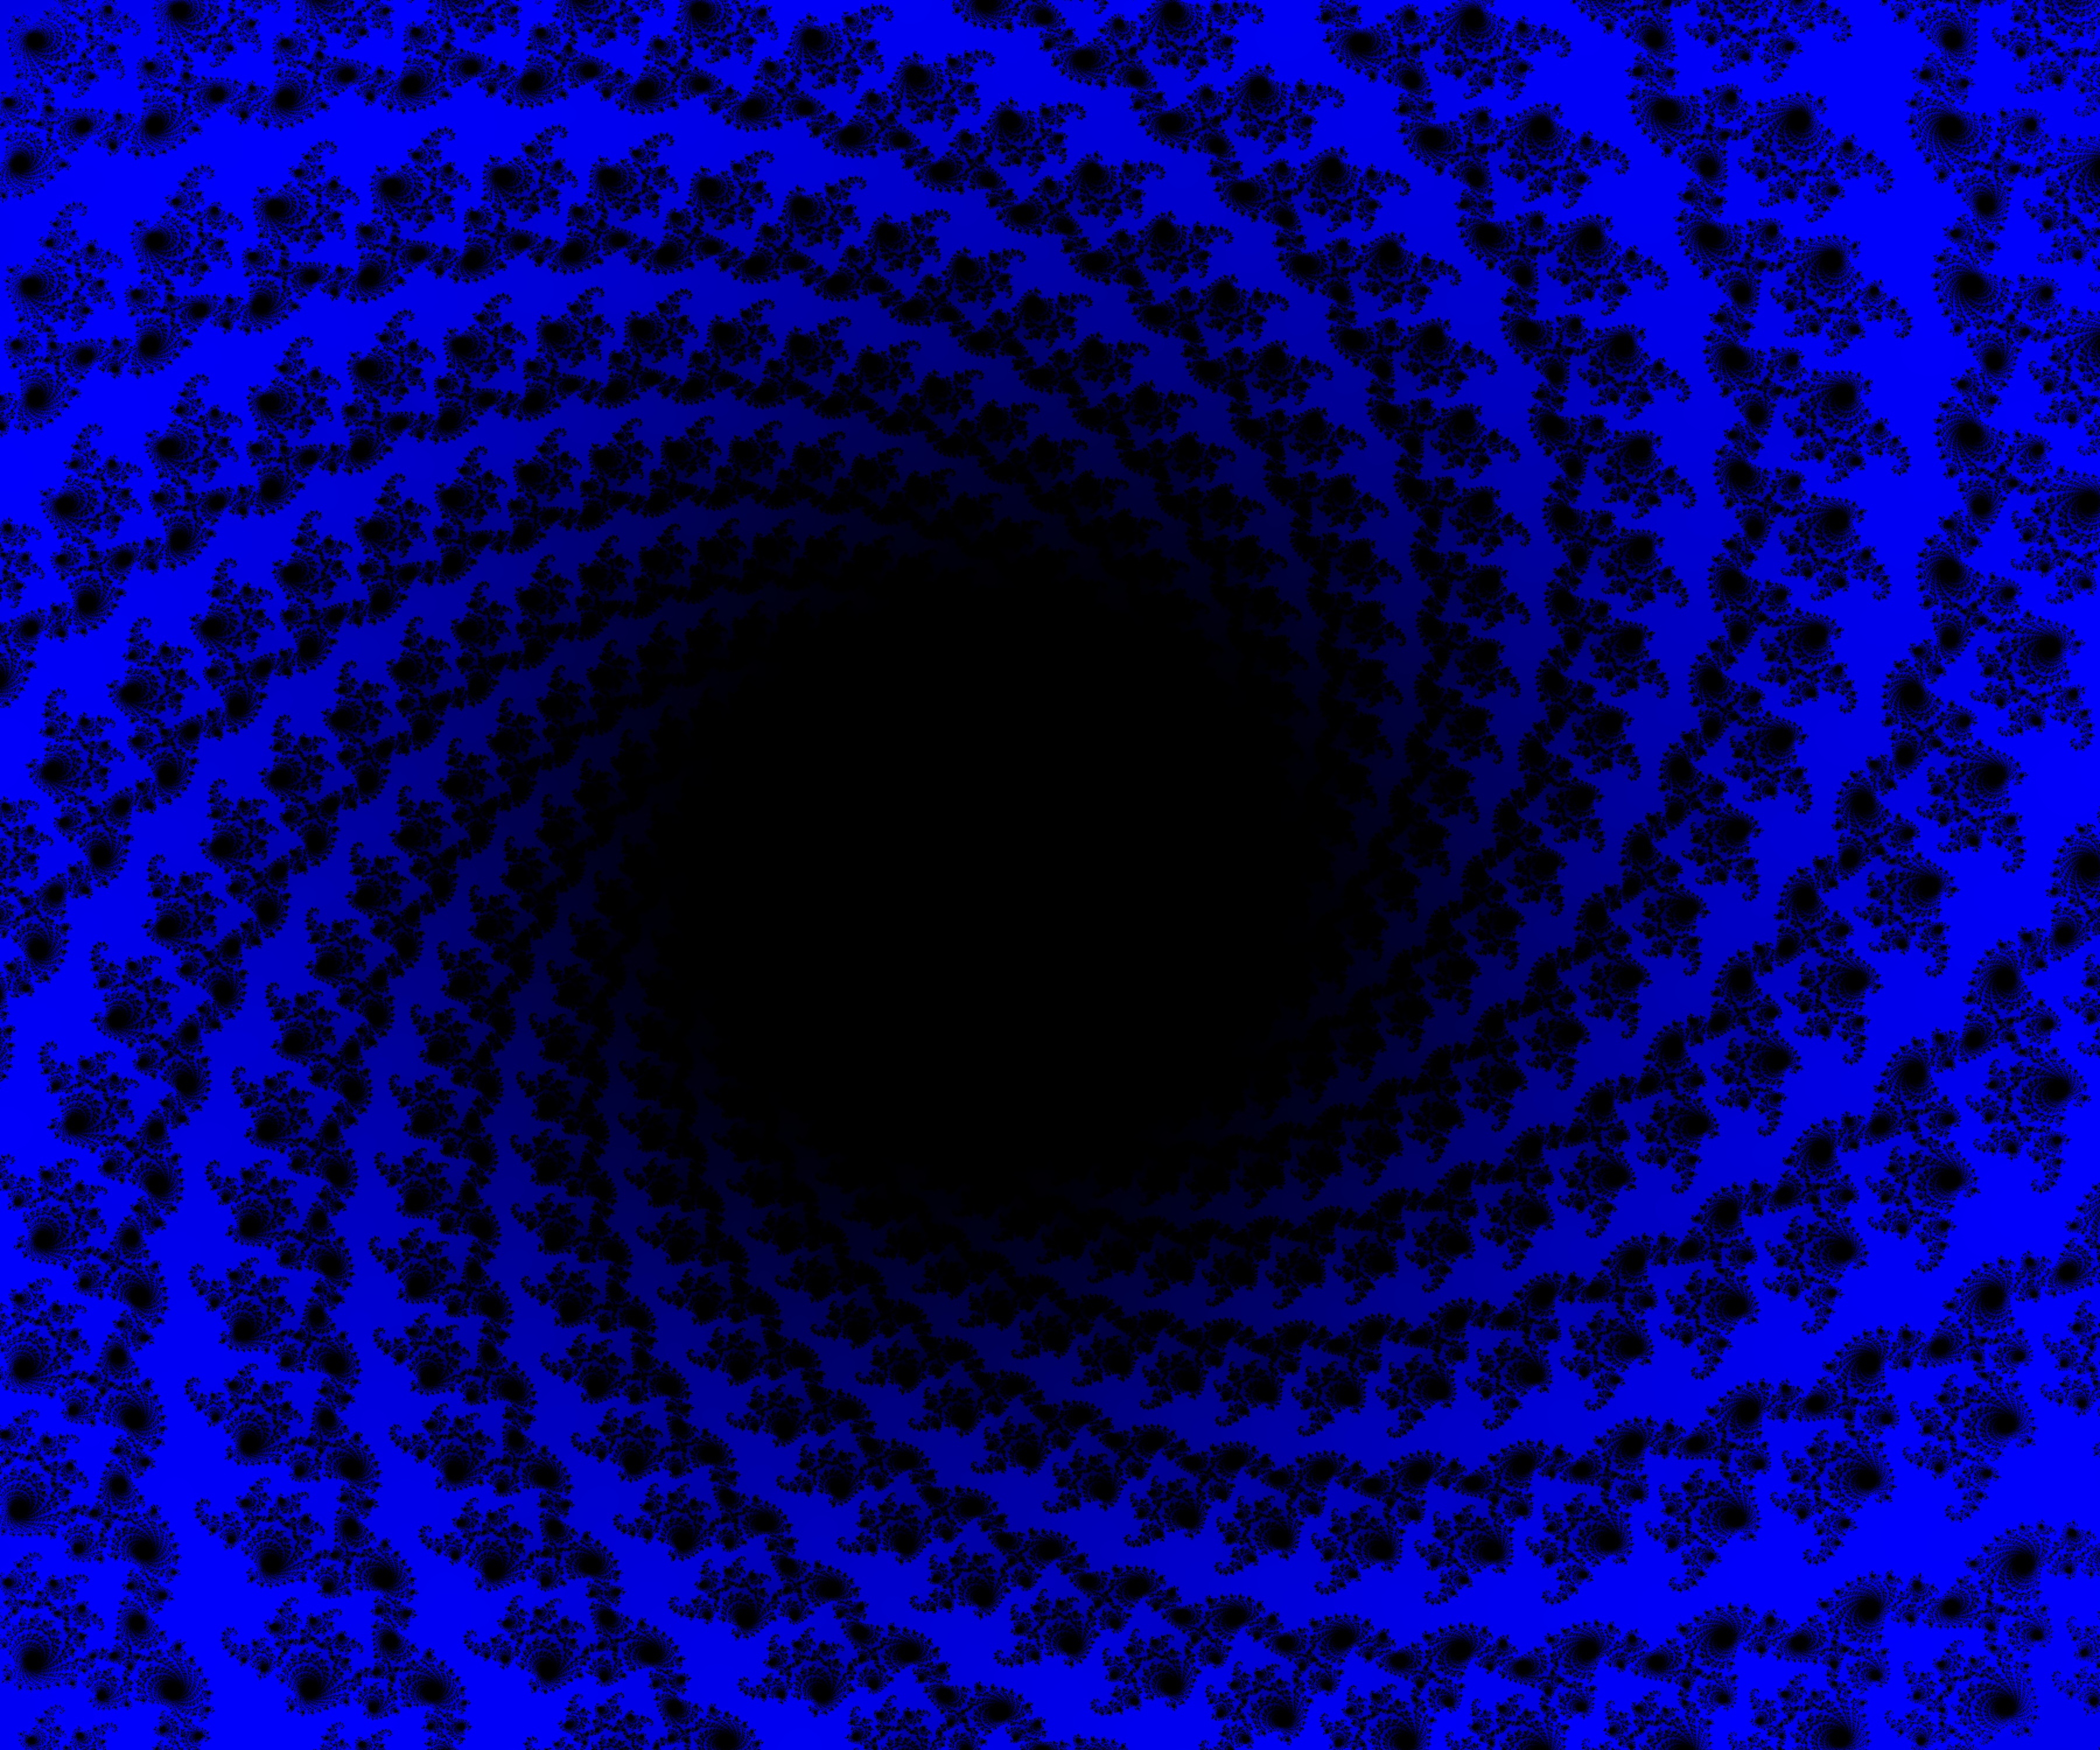 immersion, abstract, patterns, black, blue, rotation cellphone